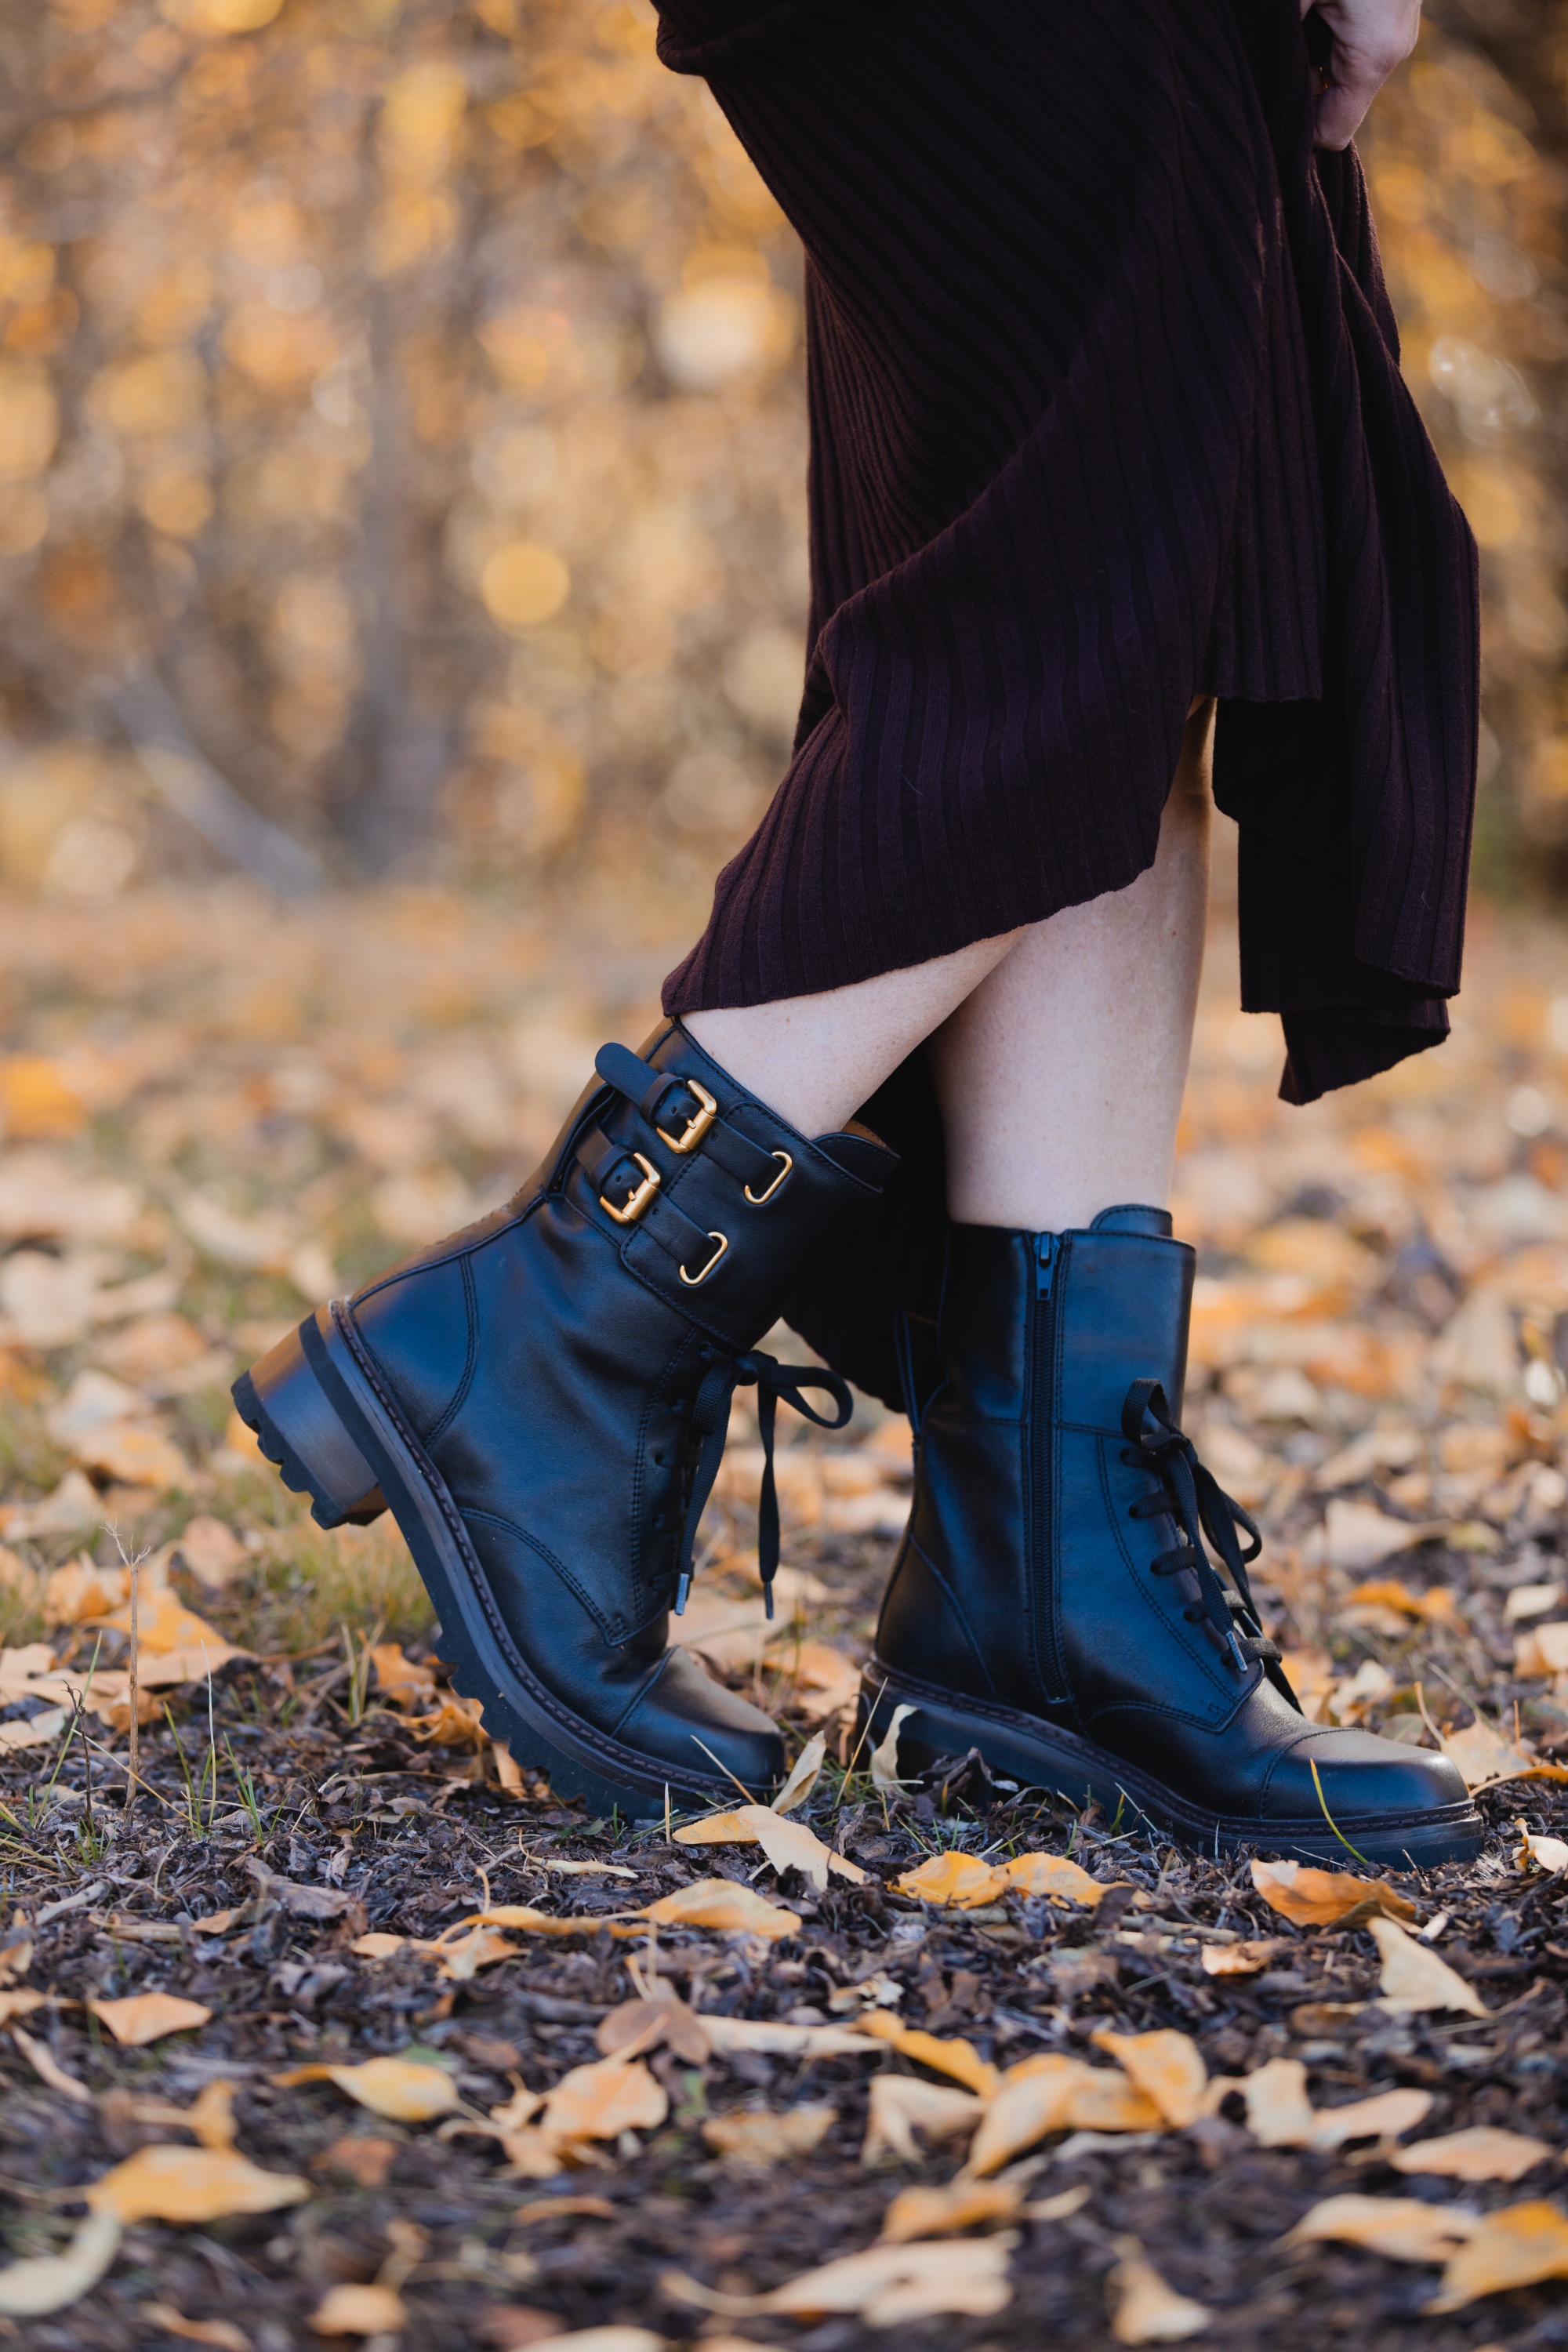 Borwn Sweater Dress, Erin Busbee of Busbee Style wearing black see by chloe combat boots with an A.L.C. brown sweater dress in Telluride, Colorado, ankle boots, knee high boot, boots with dress, boots outfit, ankle booties, chelsea boots, combat boots, ankle boots with jeans, black boots, brown boots, heeled ankle boots, wearing ankle boots, knee high boots, best boots over 40, best black boots,  best brown boots, best booties, designer booties, erin busbee, busbee style, fashion over 40